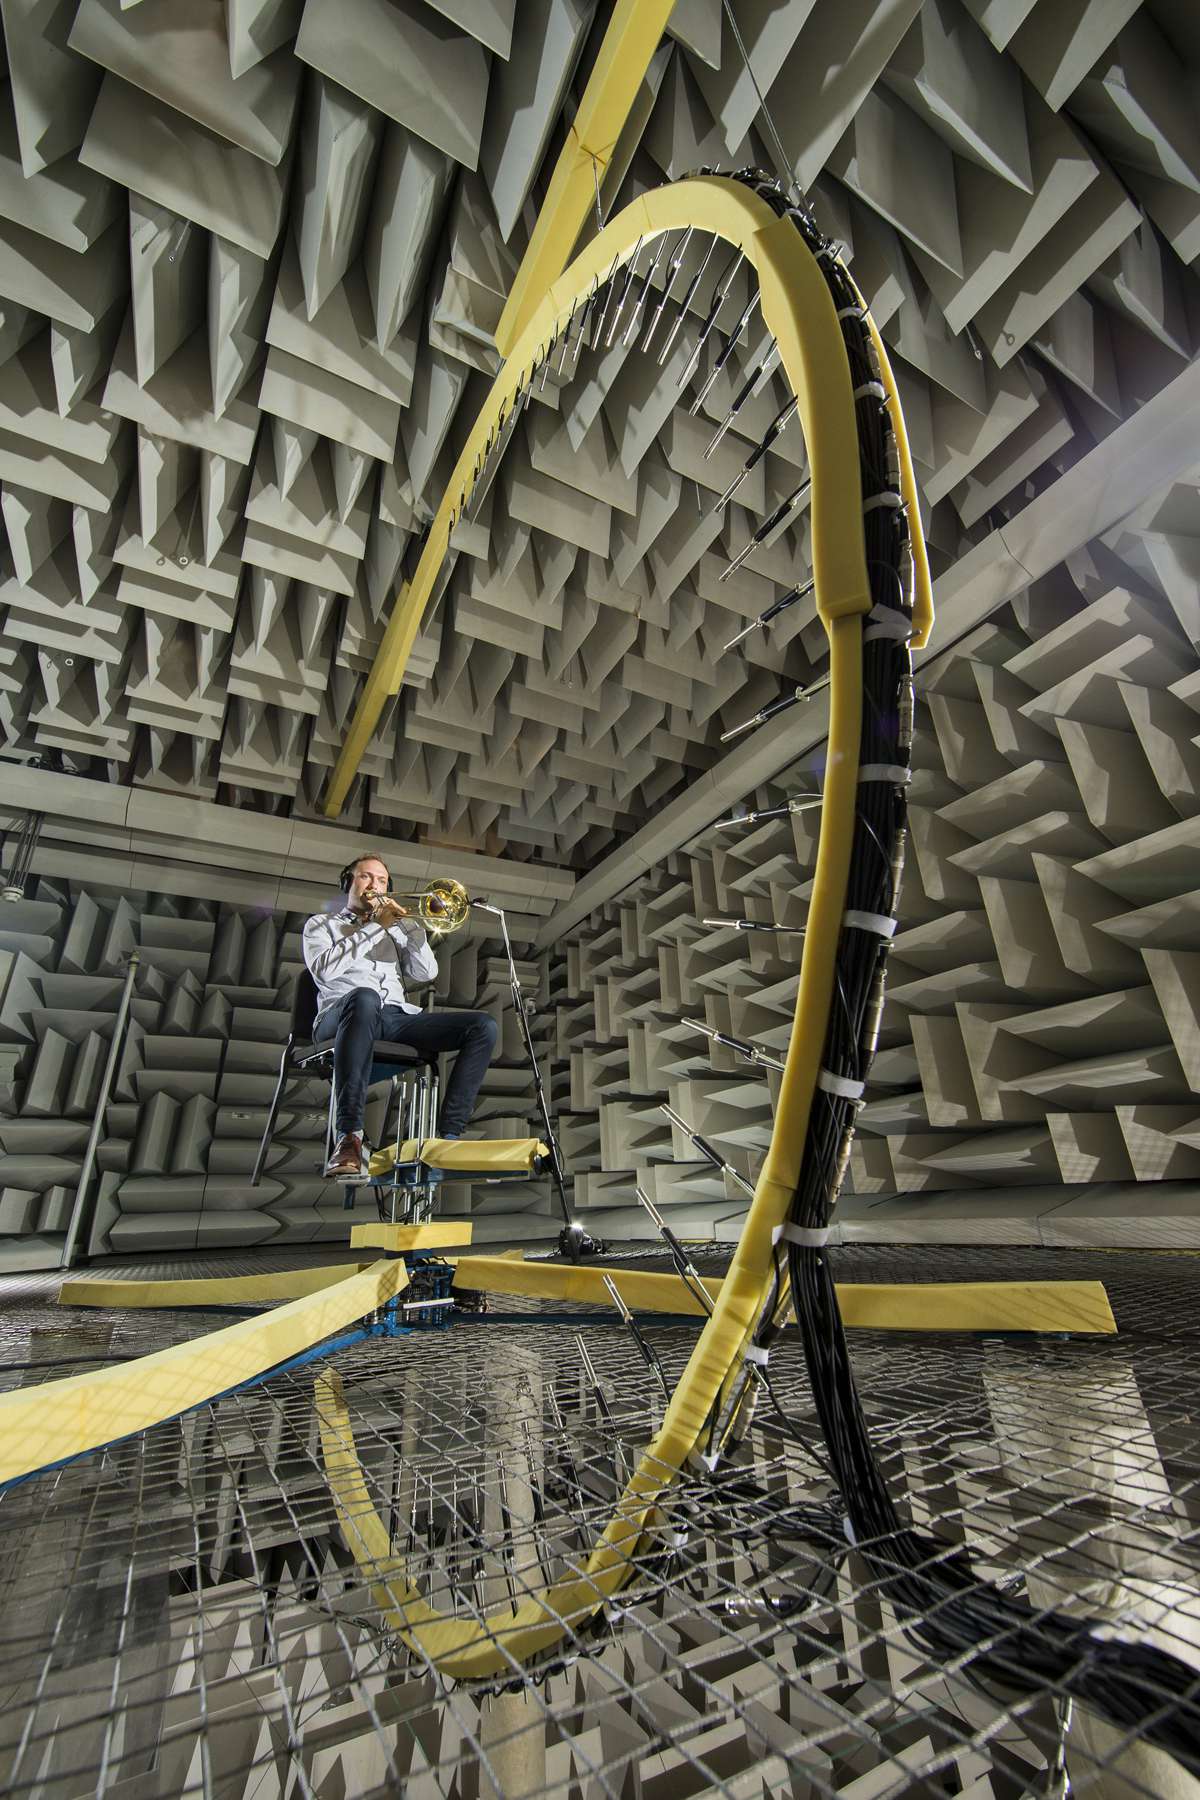 Student playing trombone in the BYU anechoic chamber